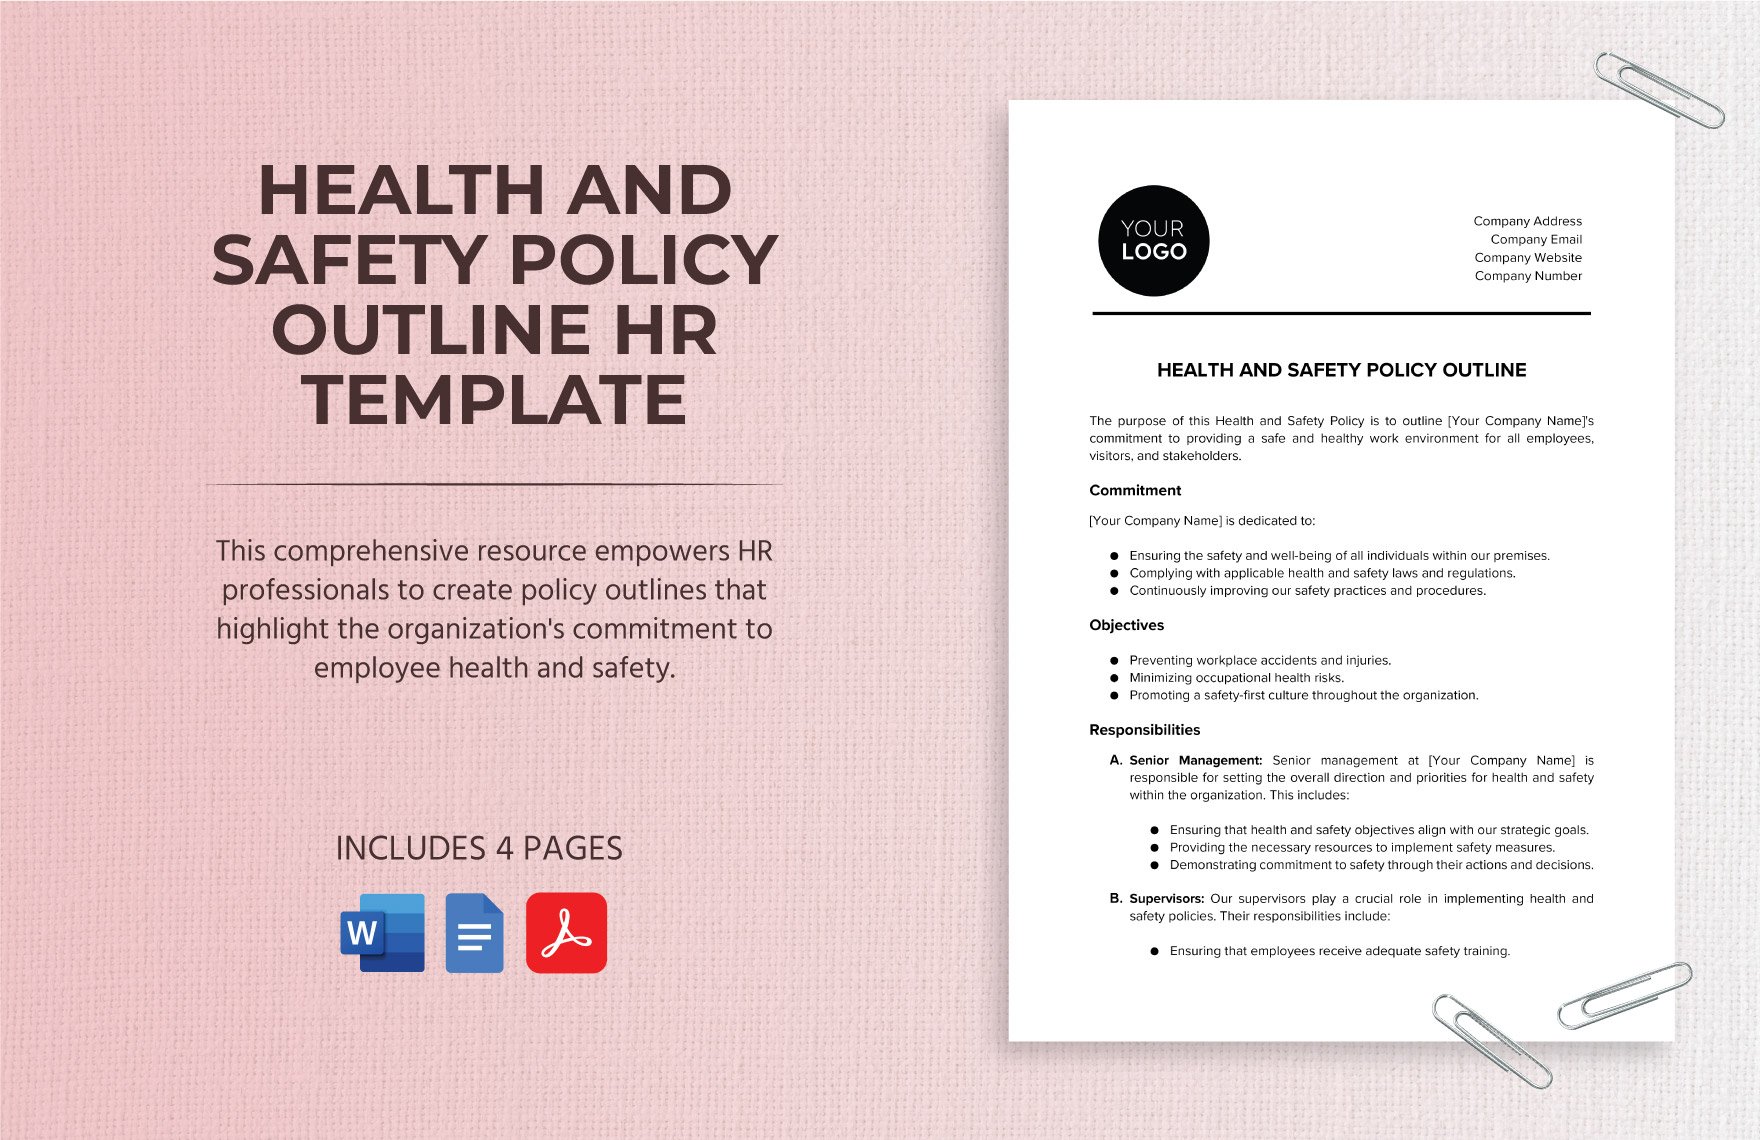 Health and Safety Policy Outline HR Template in Word, Google Docs, PDF